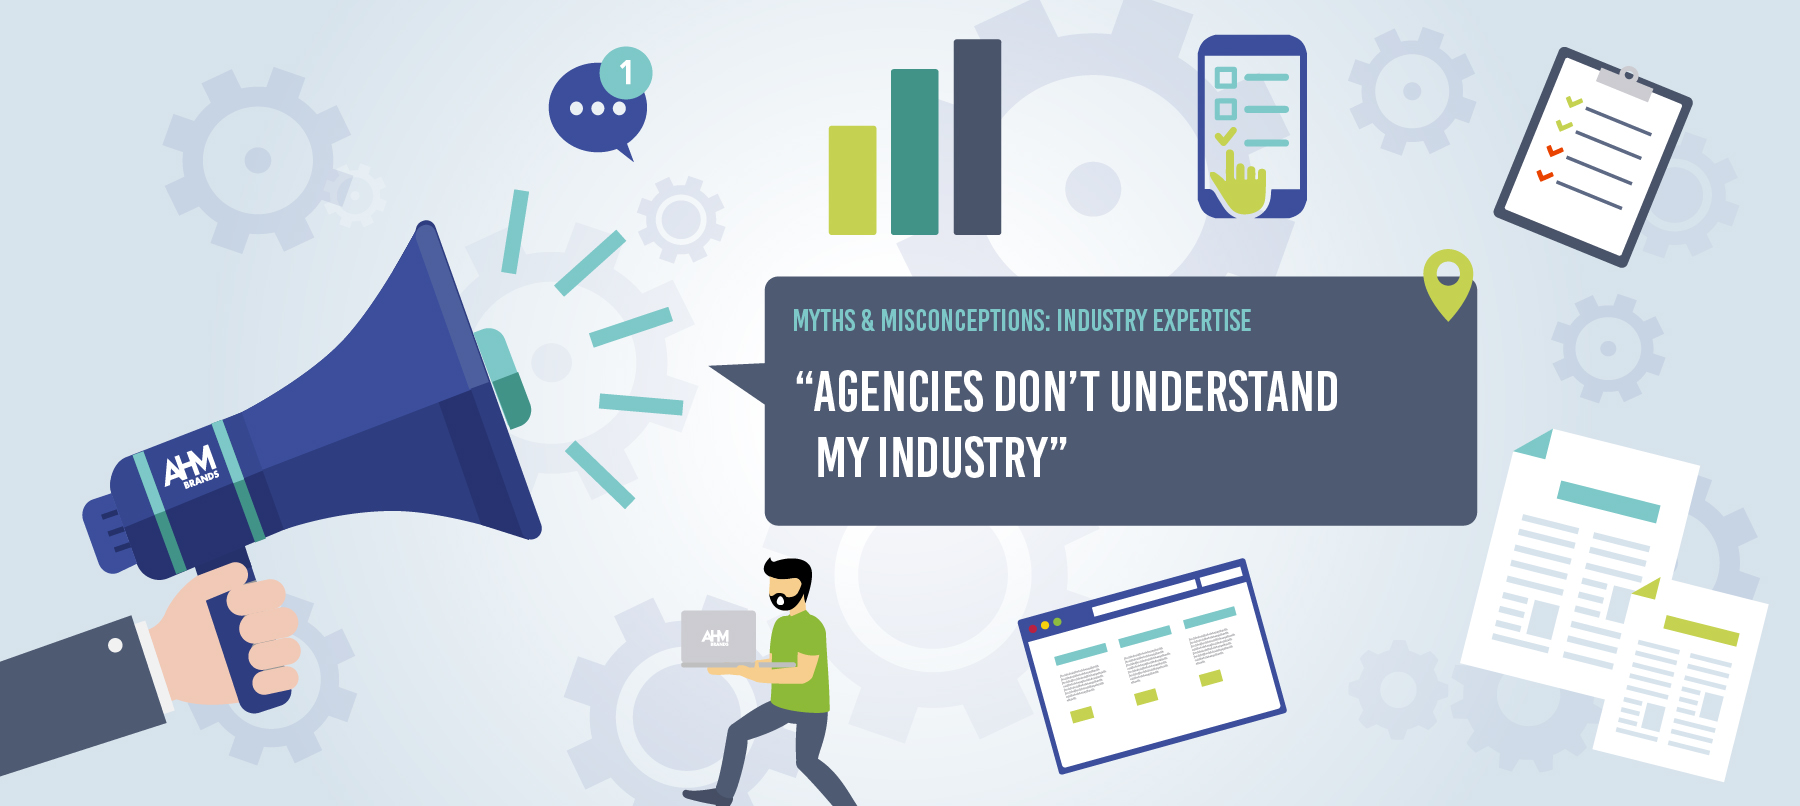 Myths and misconceptions: agencies don't understand my industry